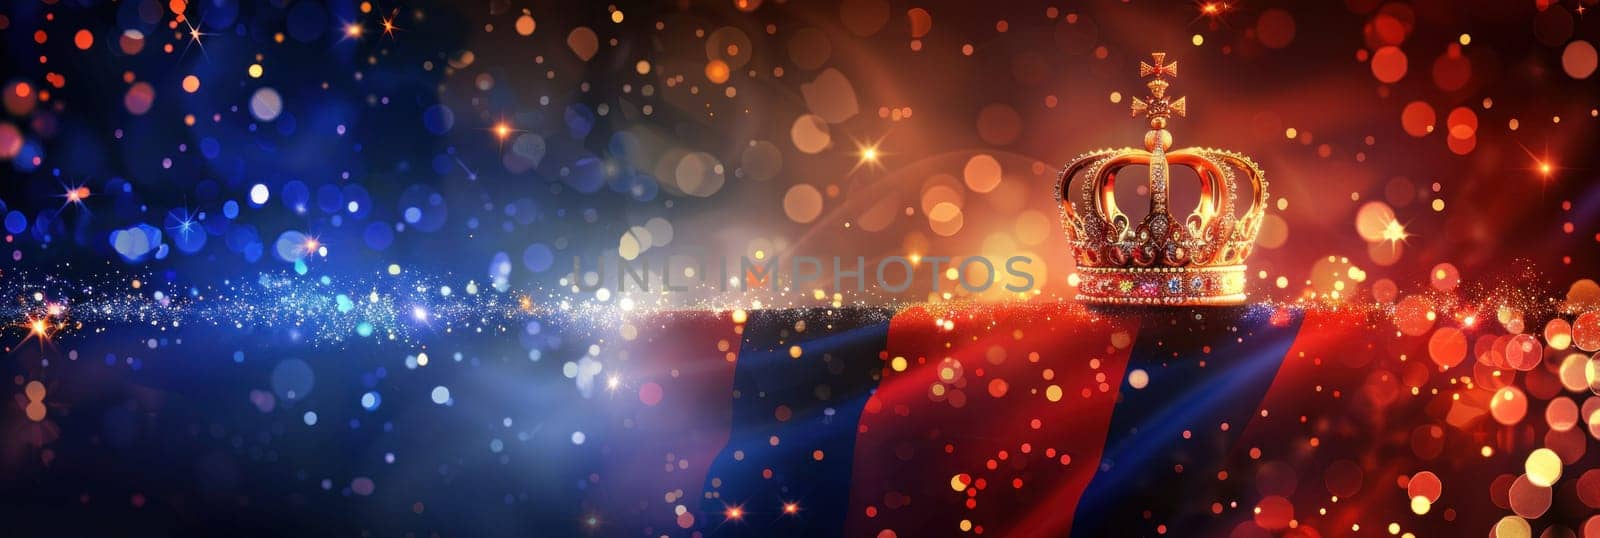 Royal crown sparkling on red, blue, and gold background with glistening lights, sparkles majestic luxury and elegance concept image by Vichizh